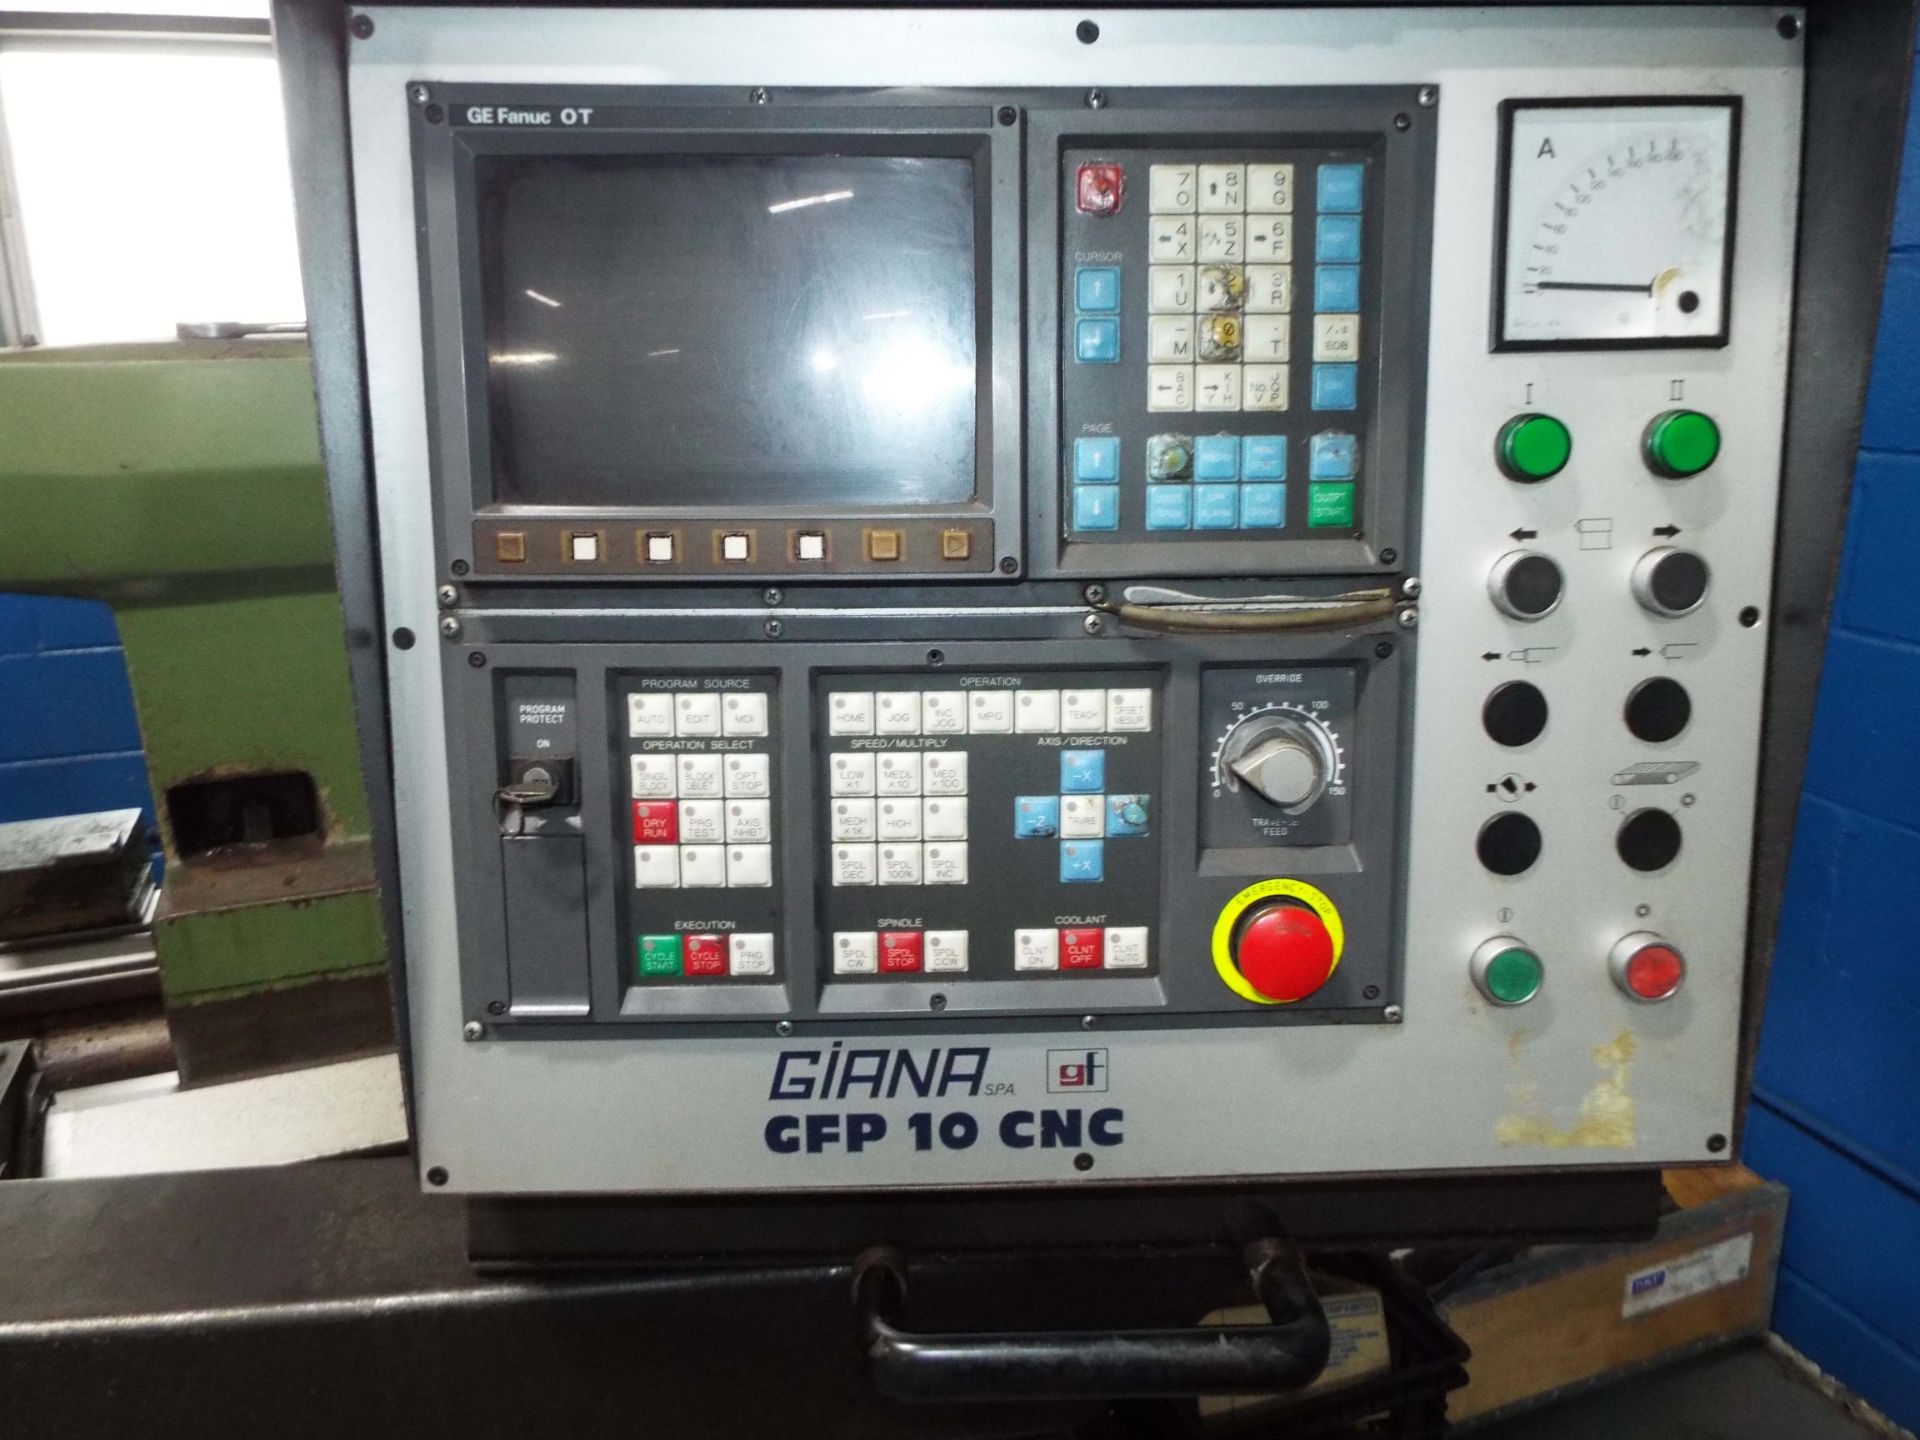 GIANA GFP 10 CNC LATHE WITH GE FANUC OT CNC CONTROL, 20" SWING OVER BED, 156" BETWEEN CENTERS, 4.75" - Image 7 of 11